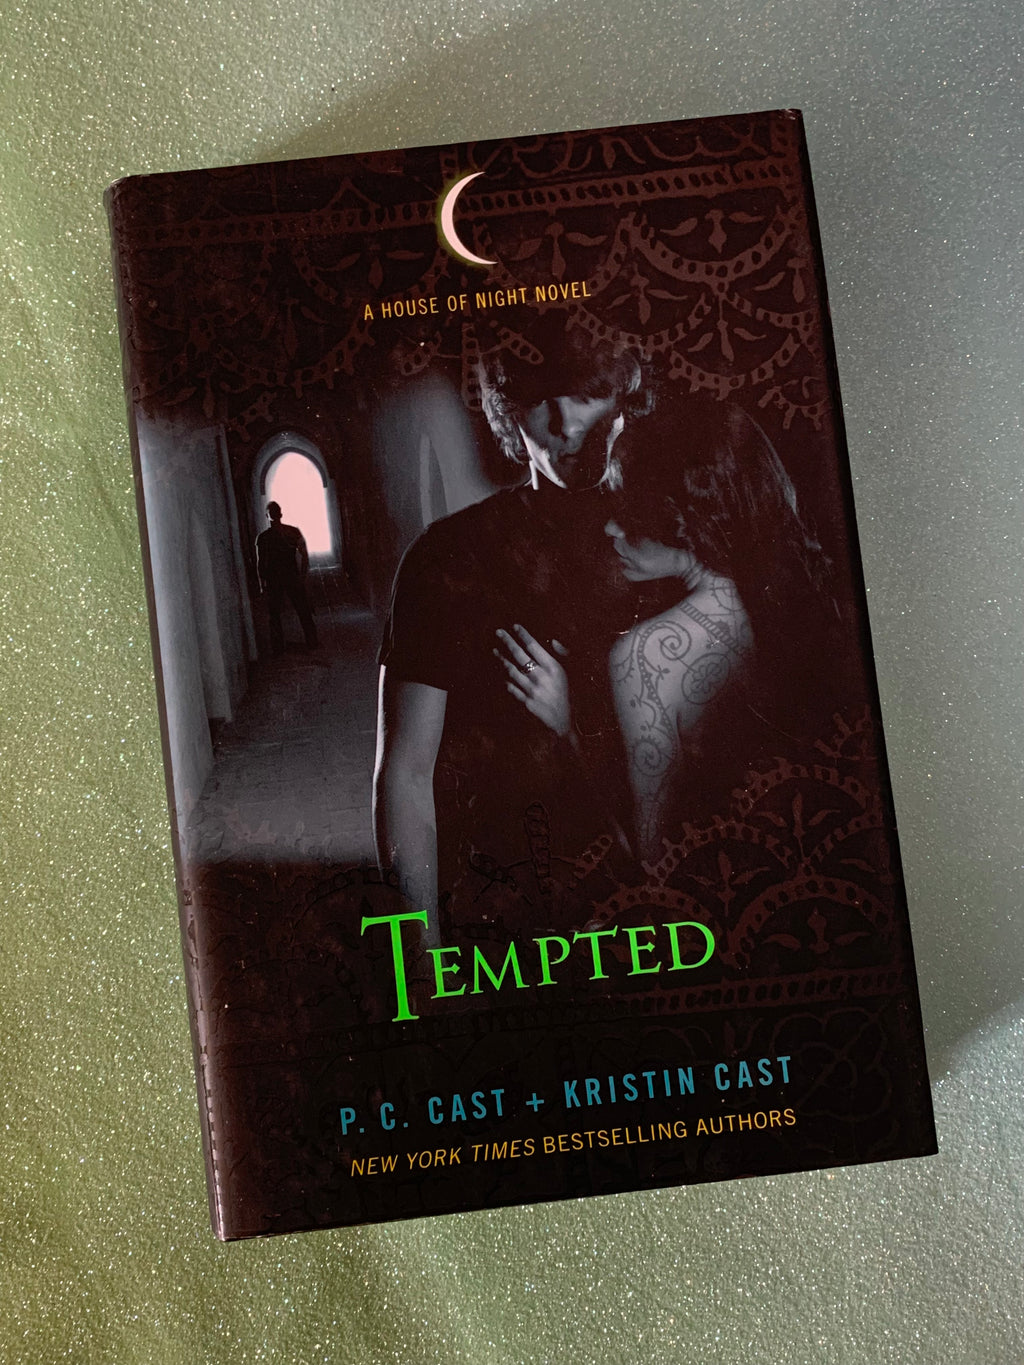 Tempted: A House of Night Novel- By P.C. Cast & Kristin Cast